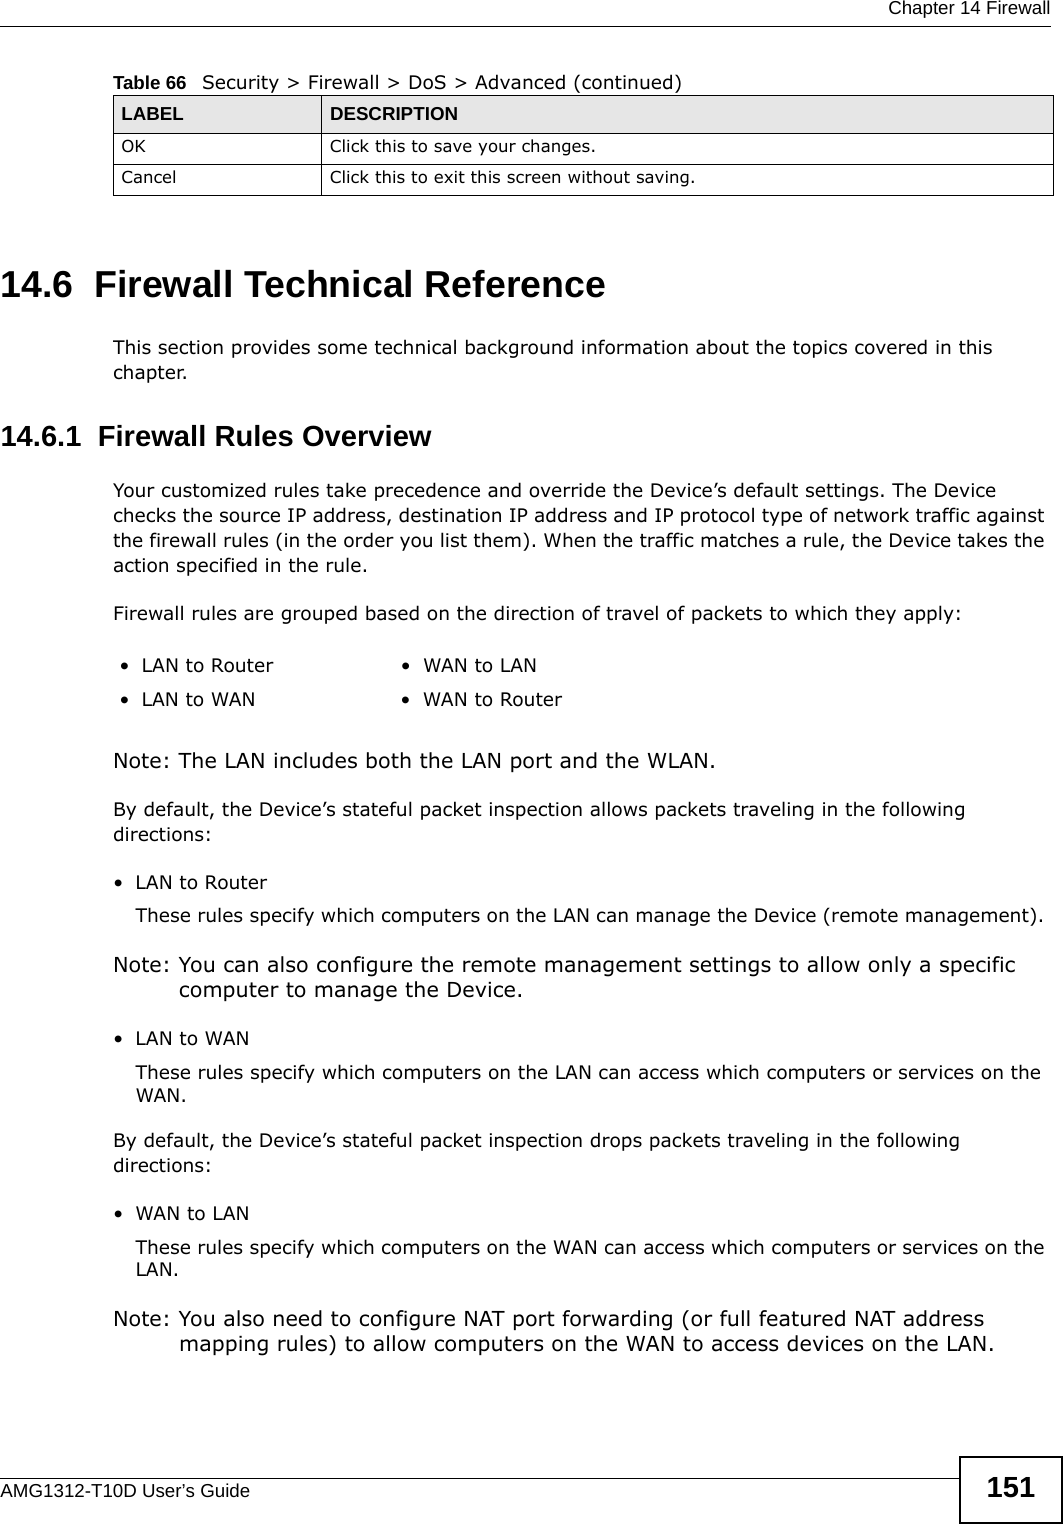  Chapter 14 FirewallAMG1312-T10D User’s Guide 15114.6  Firewall Technical ReferenceThis section provides some technical background information about the topics covered in this chapter.14.6.1  Firewall Rules OverviewYour customized rules take precedence and override the Device’s default settings. The Device checks the source IP address, destination IP address and IP protocol type of network traffic against the firewall rules (in the order you list them). When the traffic matches a rule, the Device takes the action specified in the rule. Firewall rules are grouped based on the direction of travel of packets to which they apply: Note: The LAN includes both the LAN port and the WLAN.By default, the Device’s stateful packet inspection allows packets traveling in the following directions:•LAN to Router These rules specify which computers on the LAN can manage the Device (remote management). Note: You can also configure the remote management settings to allow only a specific computer to manage the Device.•LAN to WANThese rules specify which computers on the LAN can access which computers or services on the WAN.By default, the Device’s stateful packet inspection drops packets traveling in the following directions:•WAN to LANThese rules specify which computers on the WAN can access which computers or services on the LAN. Note: You also need to configure NAT port forwarding (or full featured NAT address mapping rules) to allow computers on the WAN to access devices on the LAN.OK Click this to save your changes.Cancel Click this to exit this screen without saving.Table 66   Security &gt; Firewall &gt; DoS &gt; Advanced (continued)LABEL DESCRIPTION•LAN to Router •WAN to LAN• LAN to WAN • WAN to Router